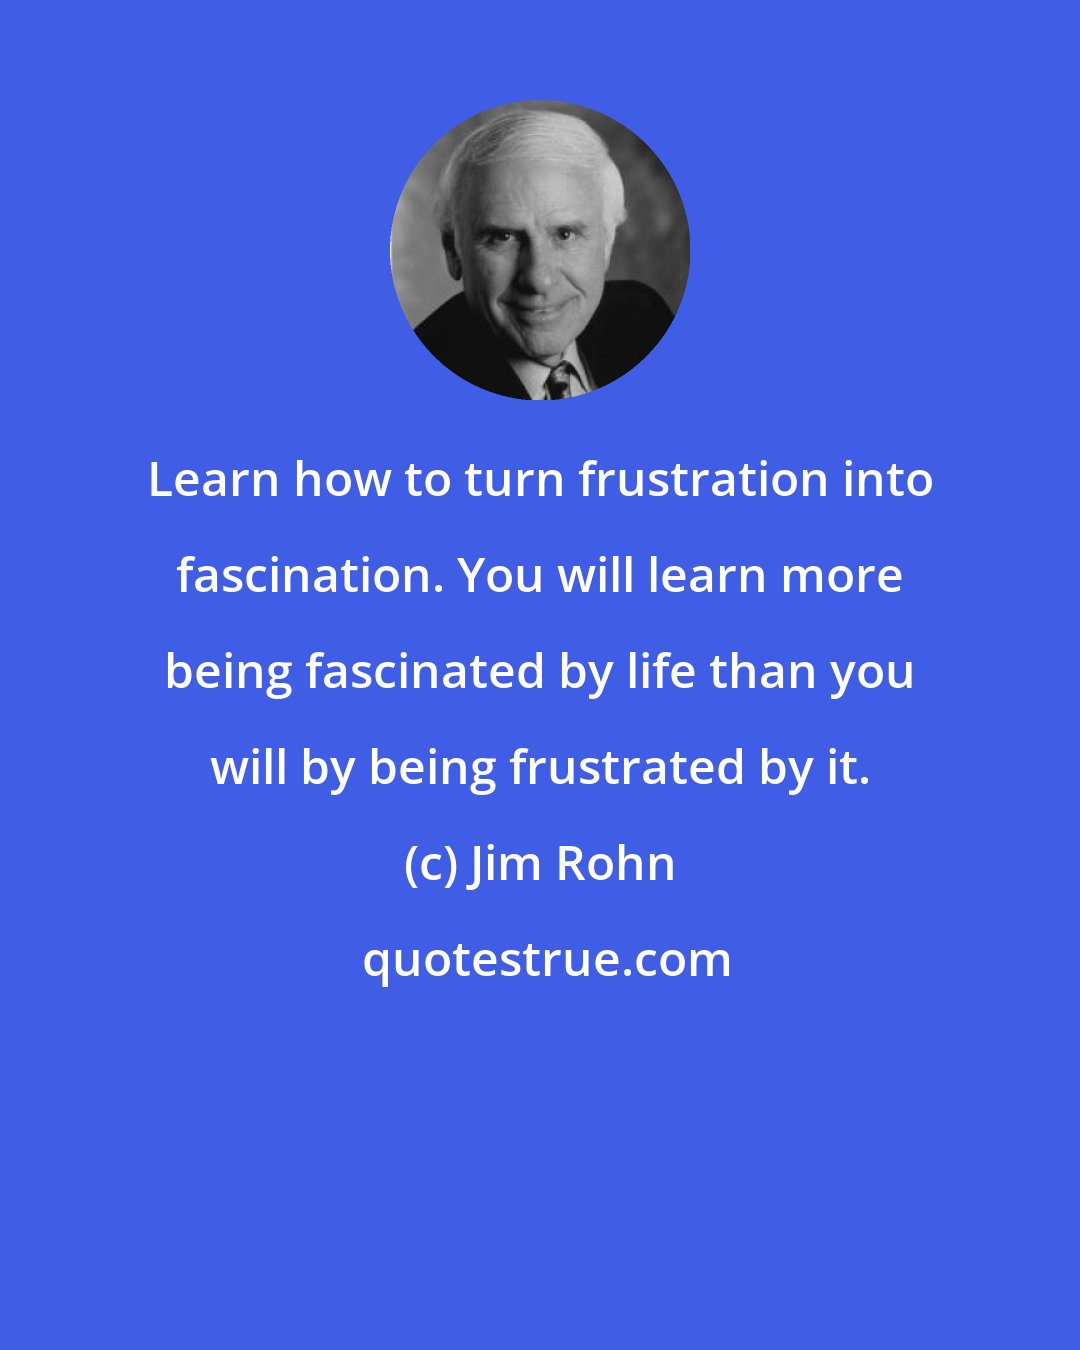 Jim Rohn: Learn how to turn frustration into fascination. You will learn more being fascinated by life than you will by being frustrated by it.